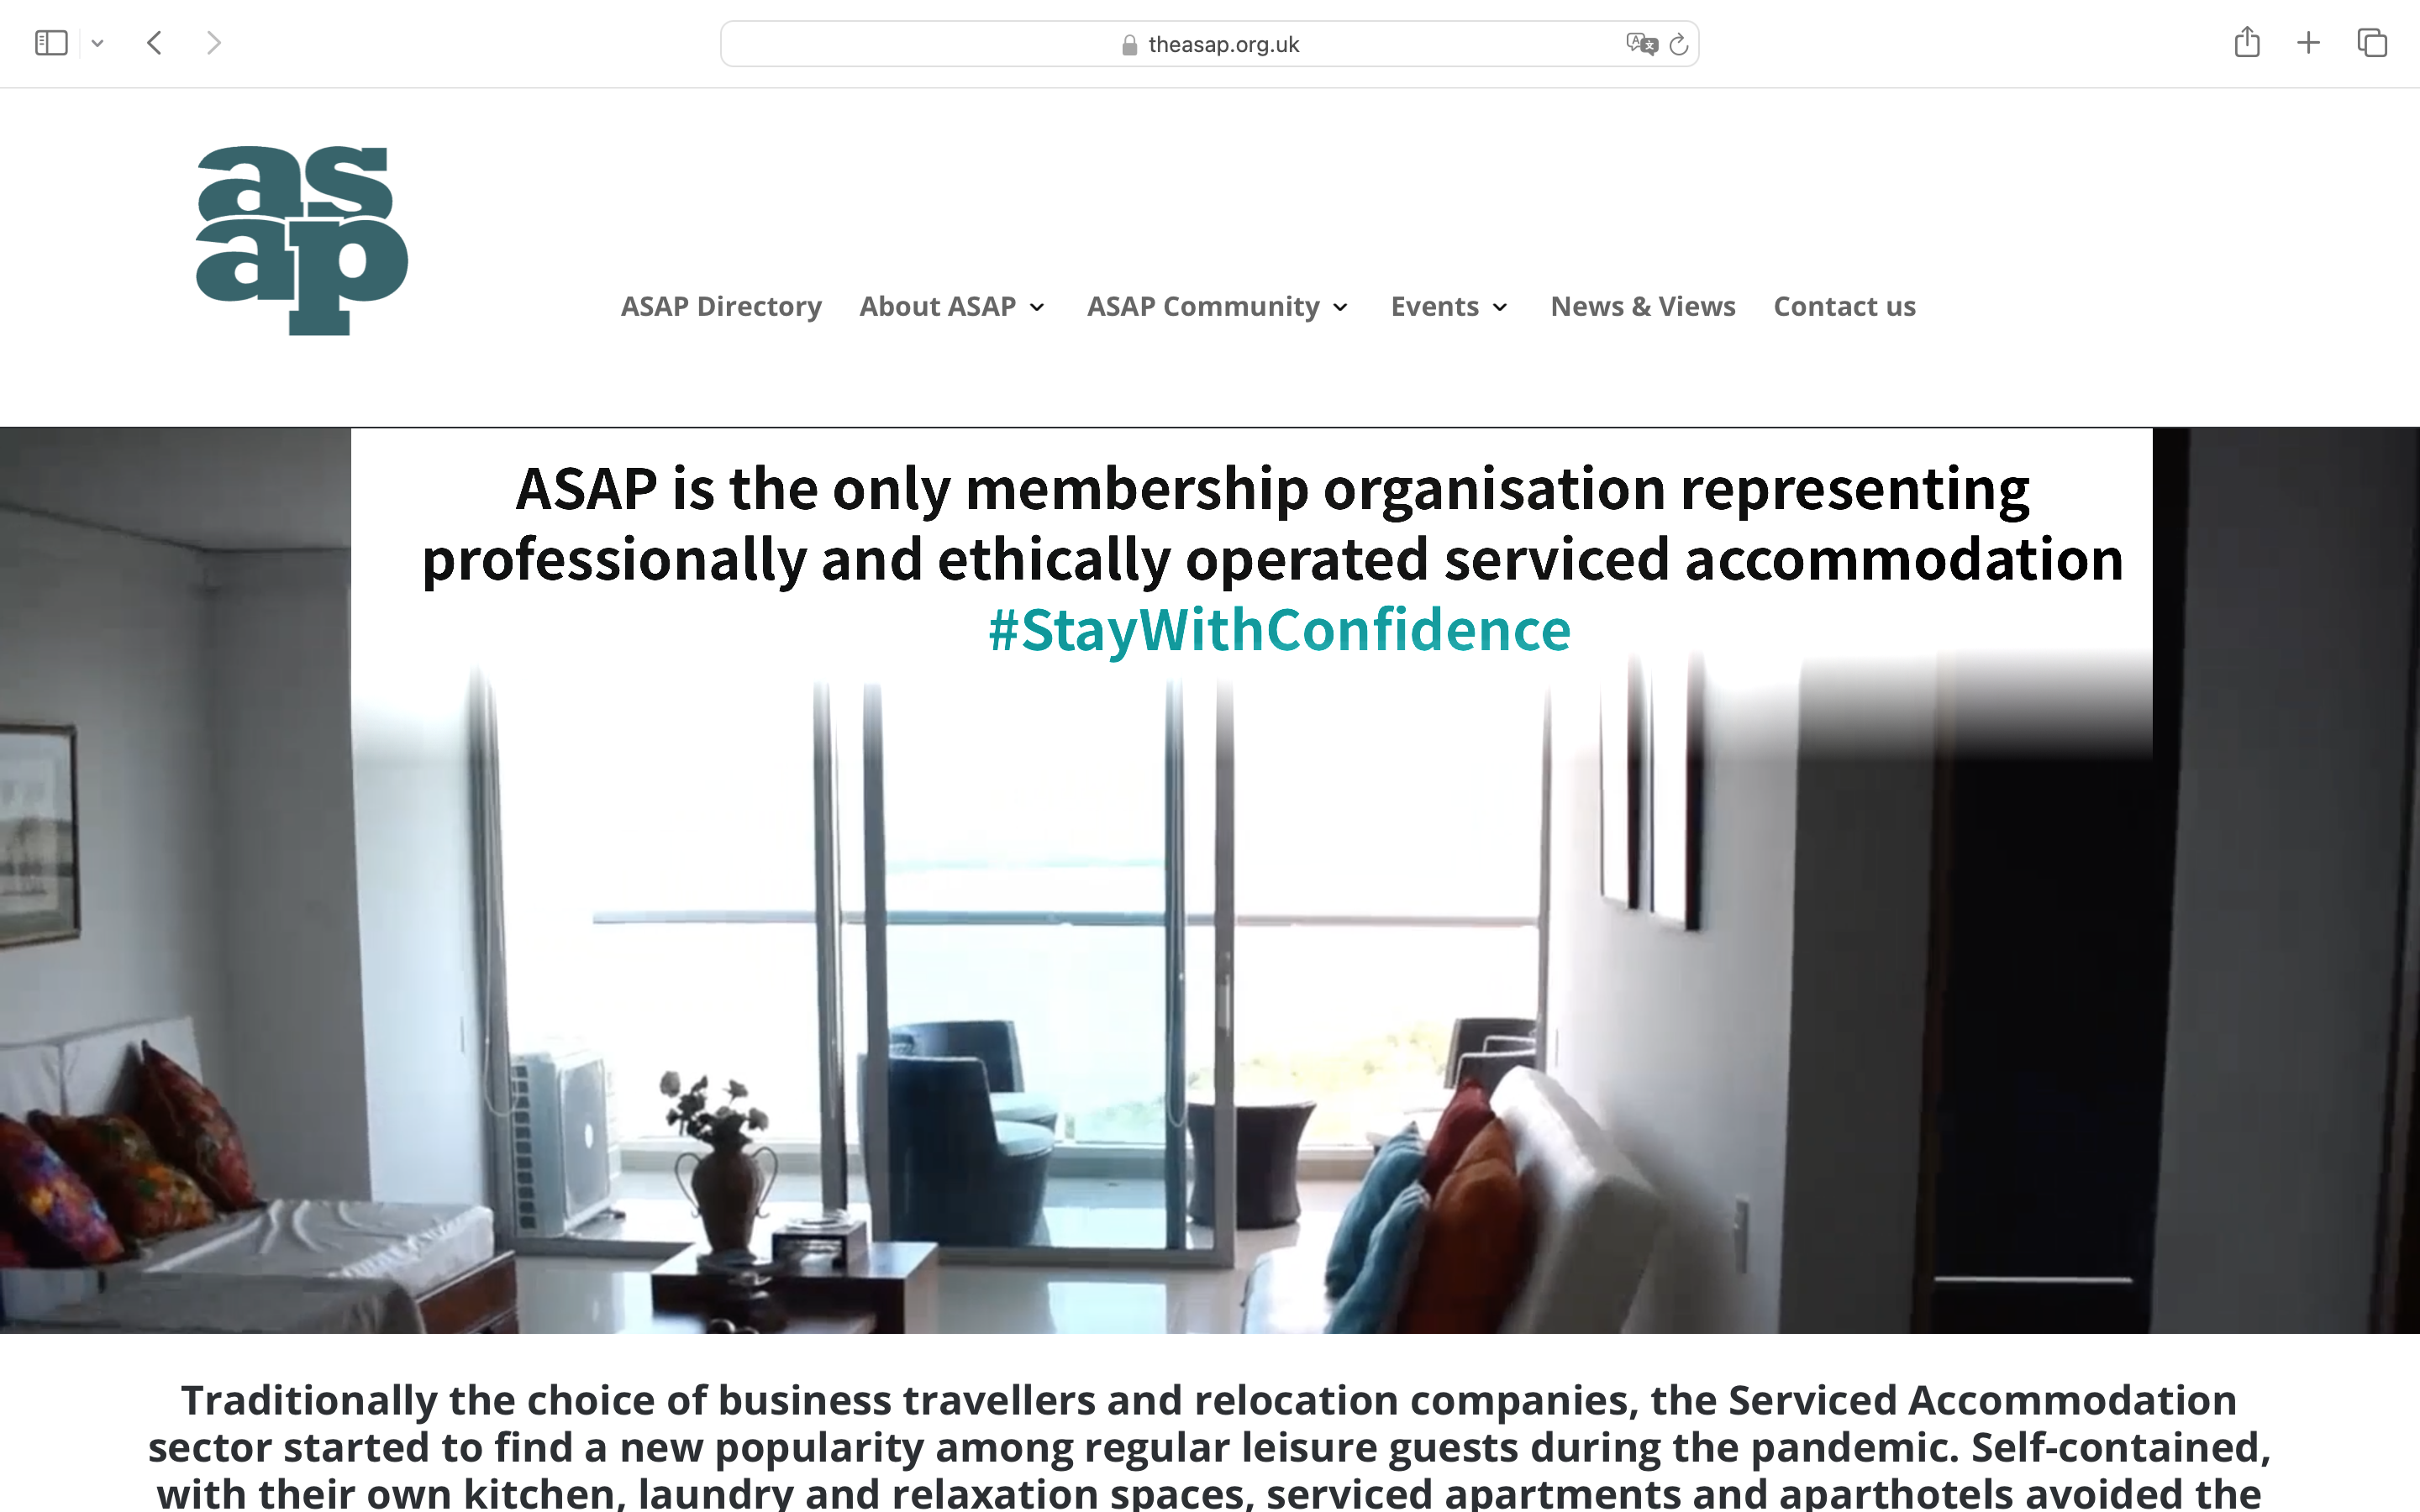 A screenshot of the previous version of The ASAP's homepage, with an image of the inside of an apartment, with light coming through a large window. The text "ASAP is the only membership organisation representing professionally and ethically operated serviced accommodations #StatWithConfidence" are shown in a white text box above the image of the apartment, with the text in black, except for the hashtag text in light blue font.